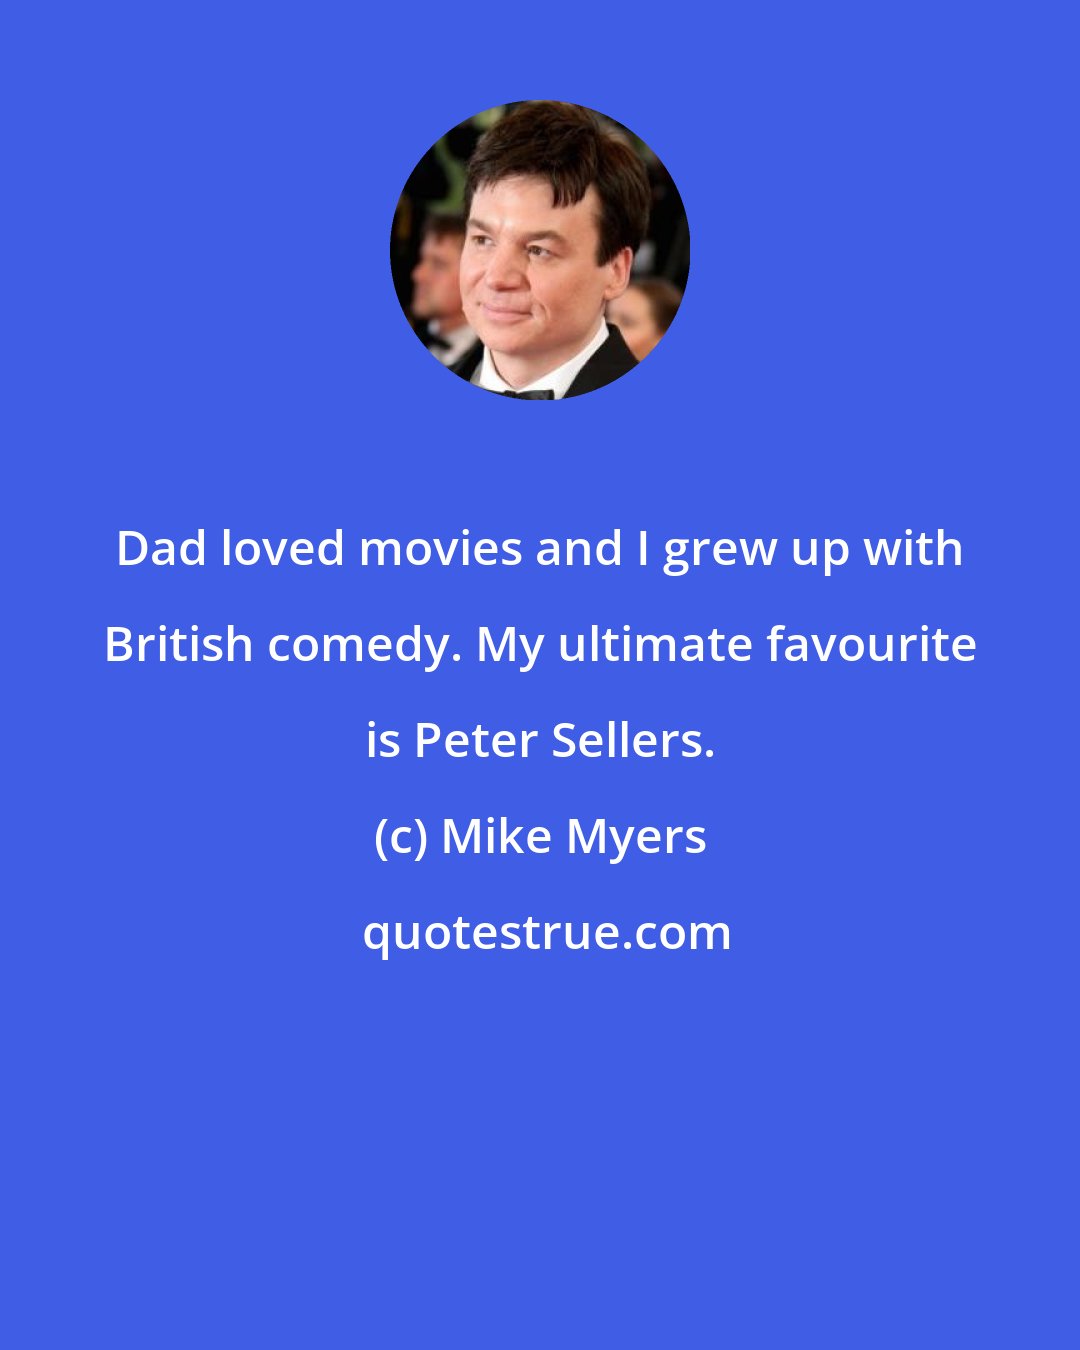 Mike Myers: Dad loved movies and I grew up with British comedy. My ultimate favourite is Peter Sellers.